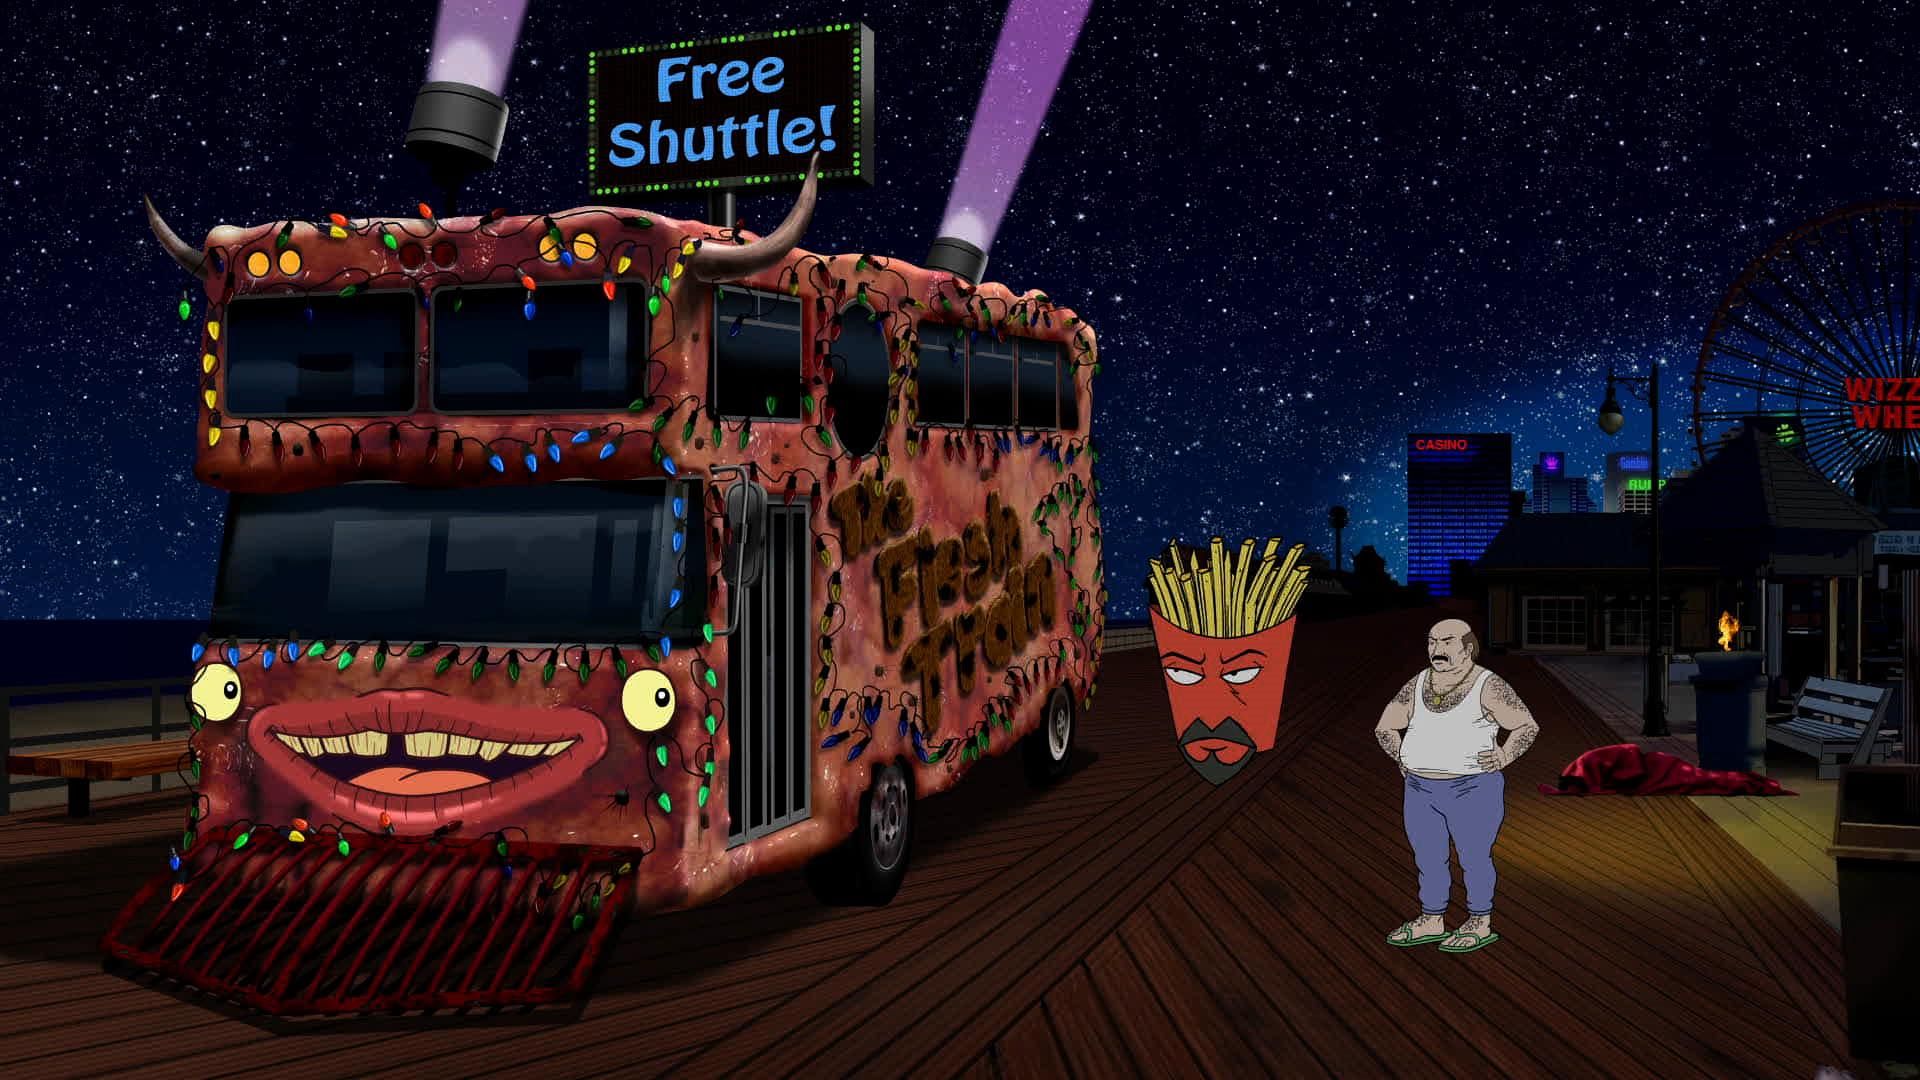 The Hairy Bus - S11